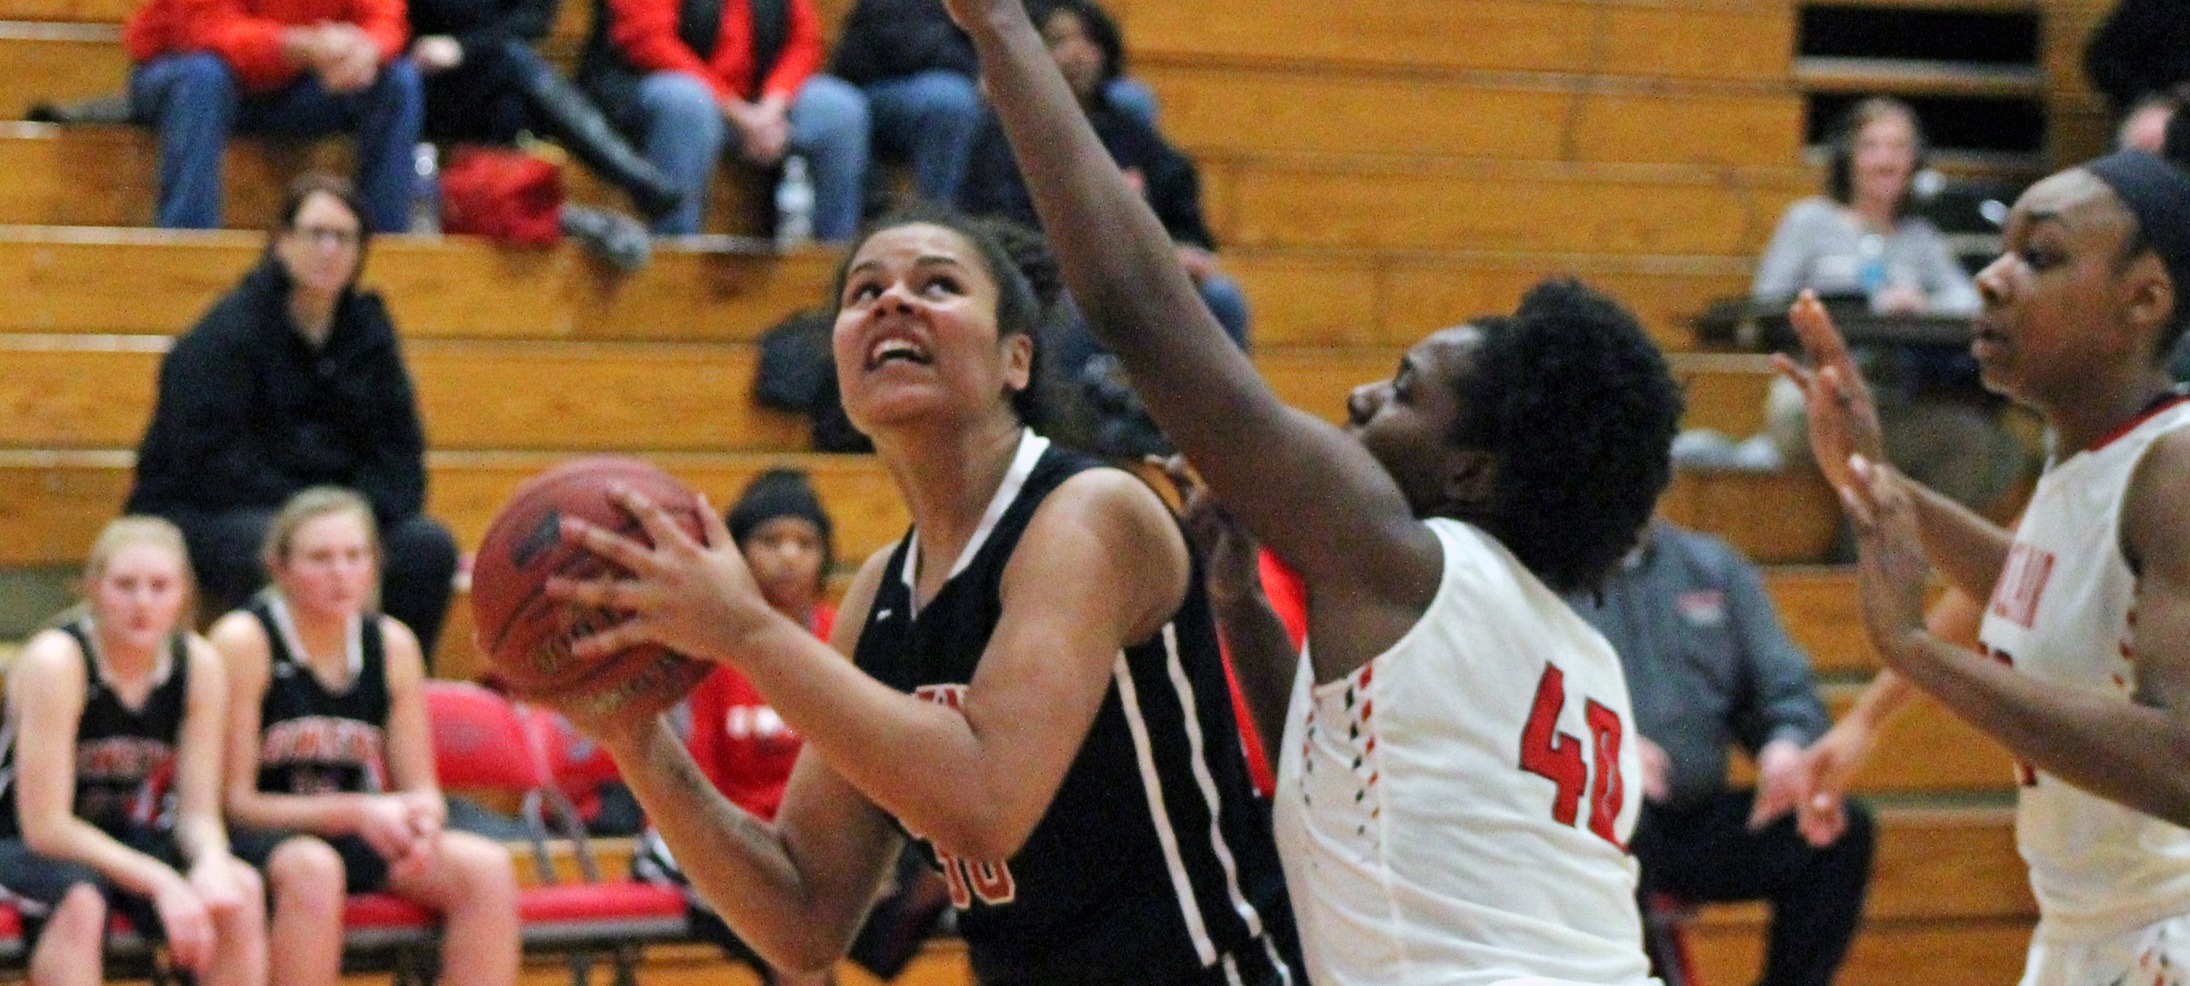 Kaylah Ivey looks to score against a Sinclair C.C. defender. Photo by Nicholas Huenefeld/Owens Sports Information